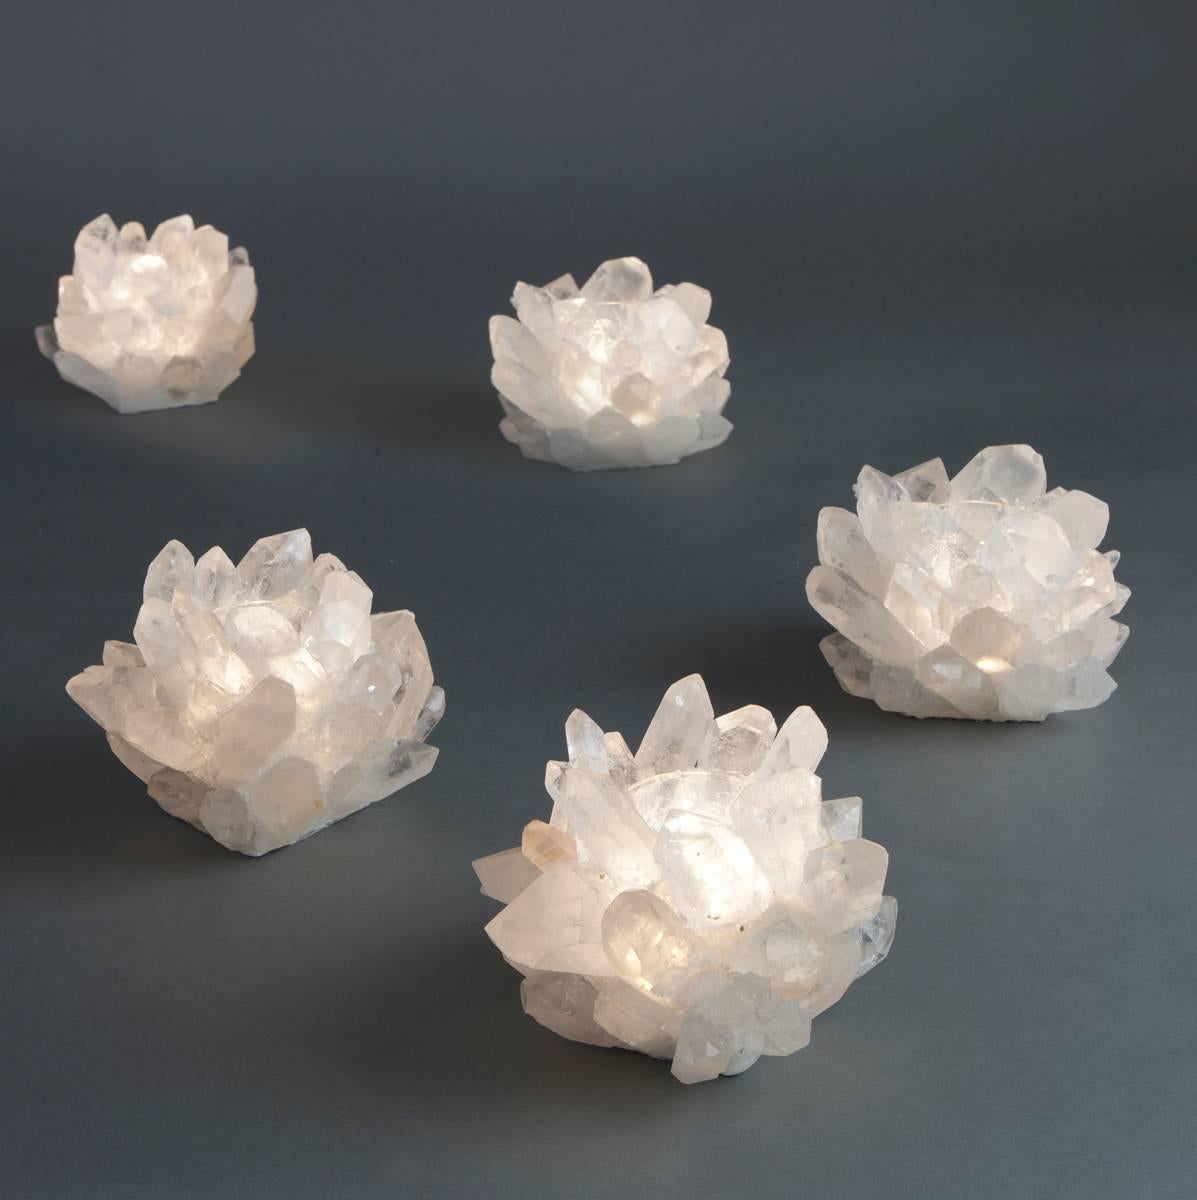 Crystal candleholders made expressly for Liz O'Brien.
Handcrafted with large pieces of natural rock crystal. Beautiful singly or as a group on dining tables or larger arrangements.
Gift wrapped in Liz O'Brien boxes.